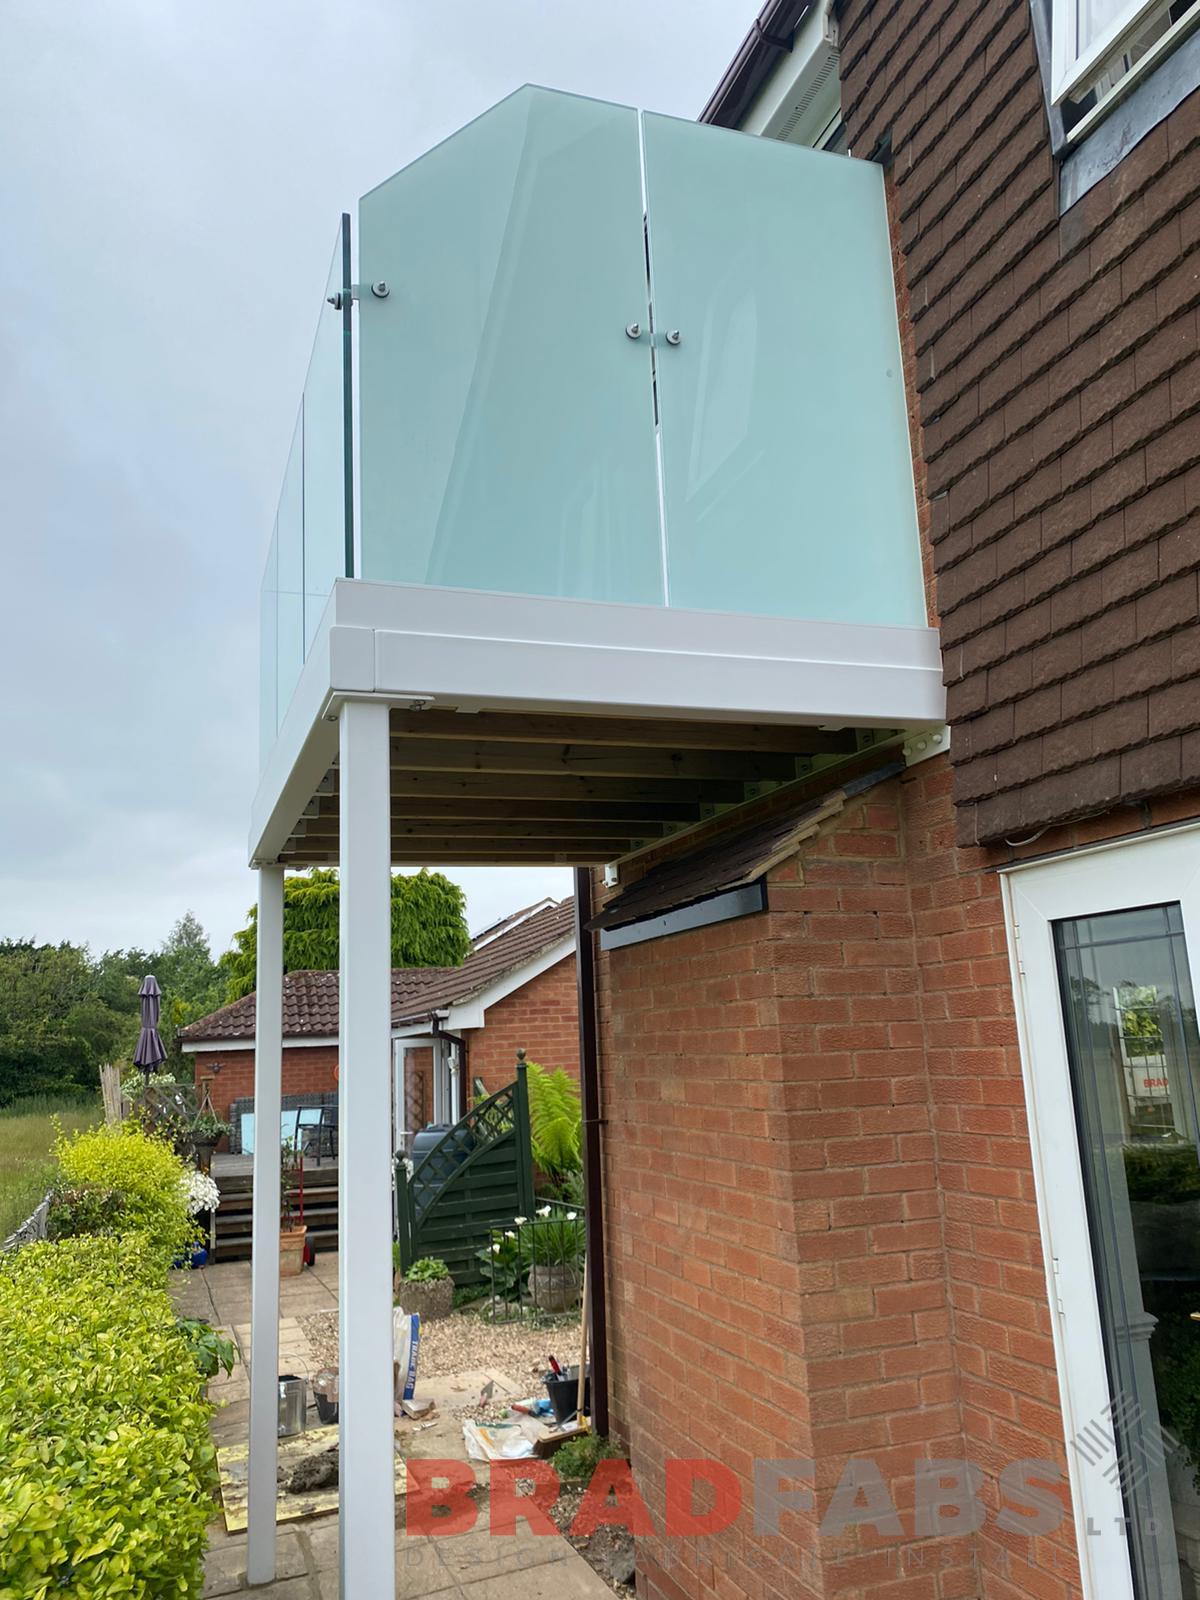 channel system infinity glass balustrade with privacy screen to one side, bespoke, designed, supplied and installed by bradfabs 